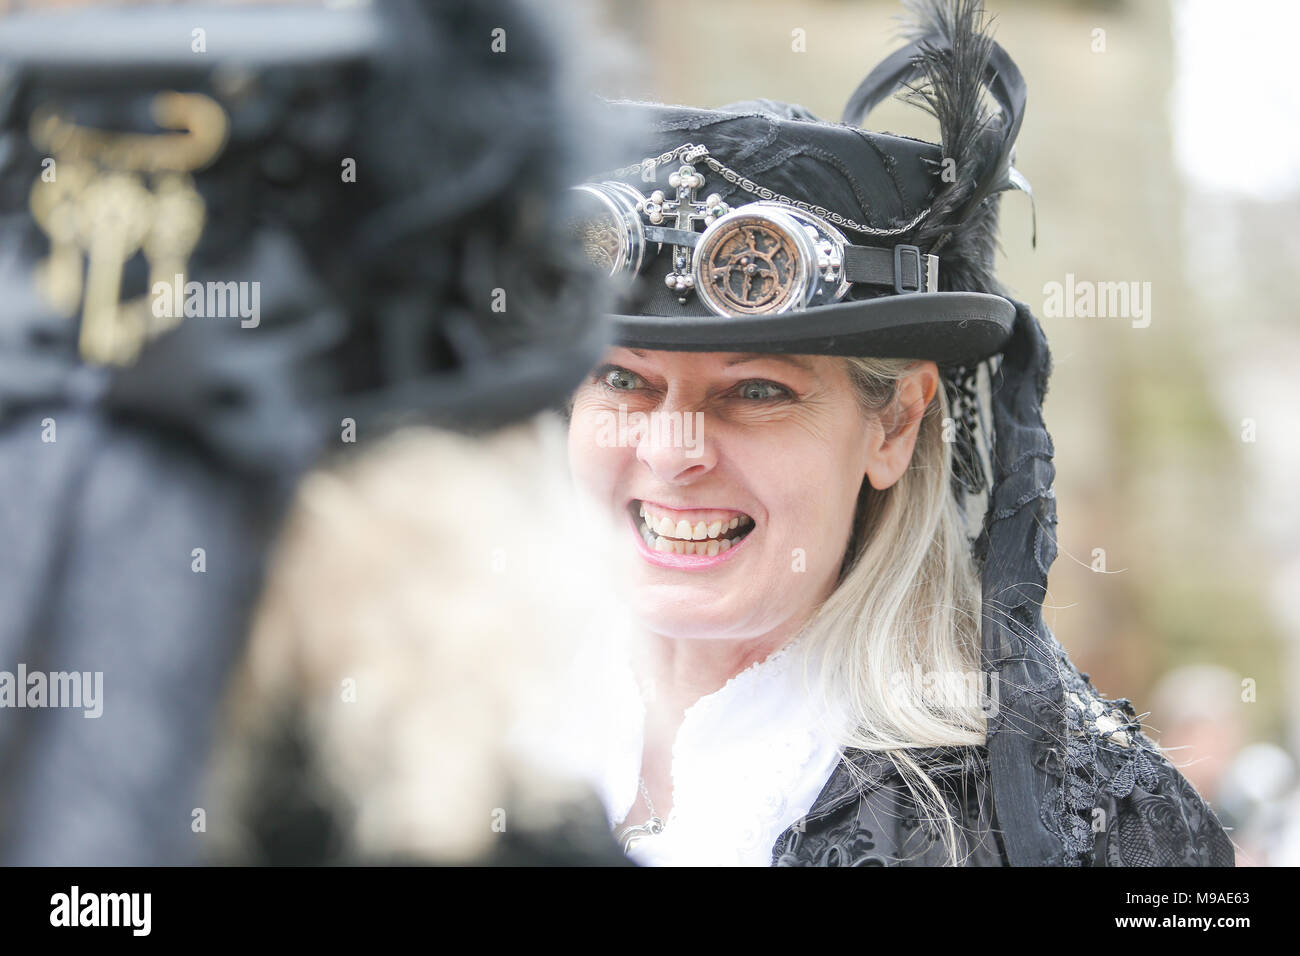 Person dressed in steampunk clothes. Steampunk is a style of fashion that combines historical elements and anachronistic technology, often inspired by Edwardian science fiction. Peter Lopeman/Alamy Live News Stock Photo